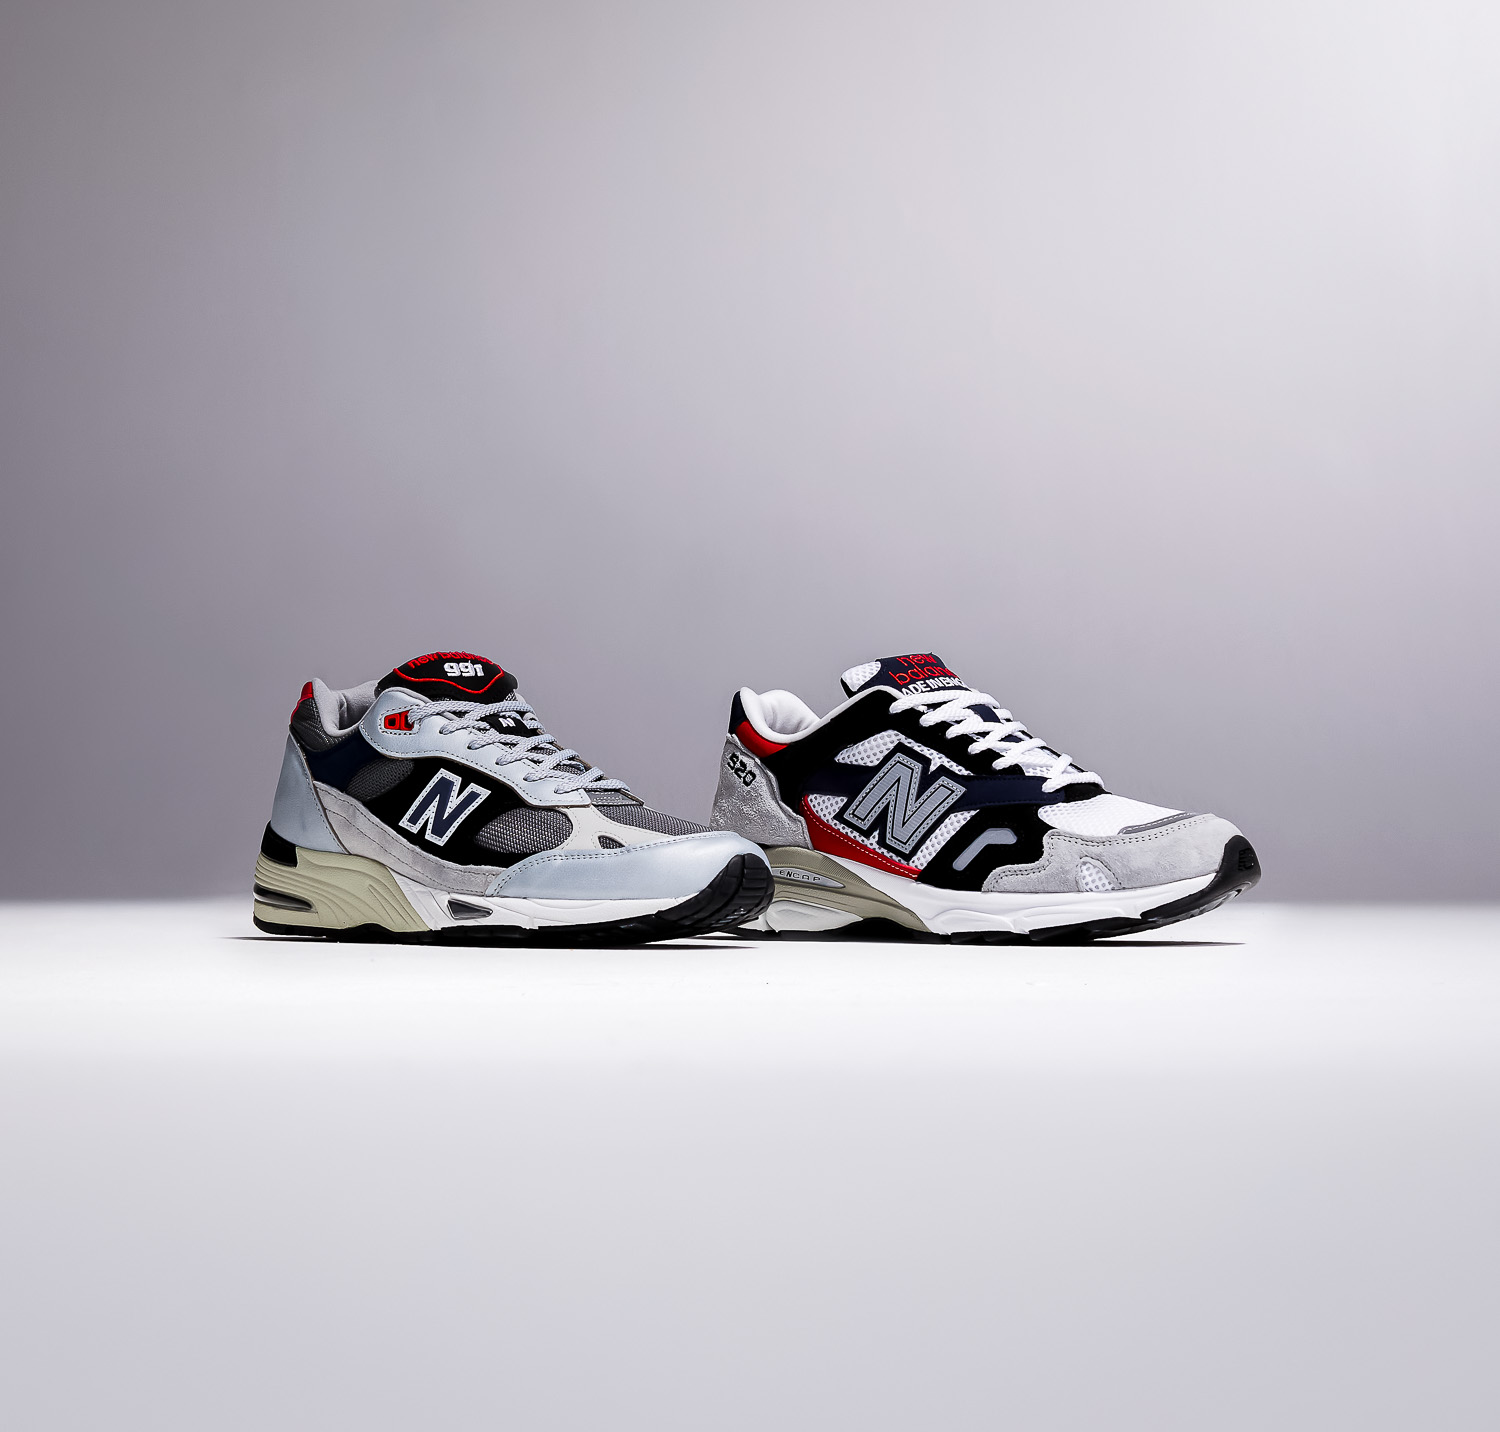 New Balance 991 - Metallic Sport Pack - Silver - Made In UK